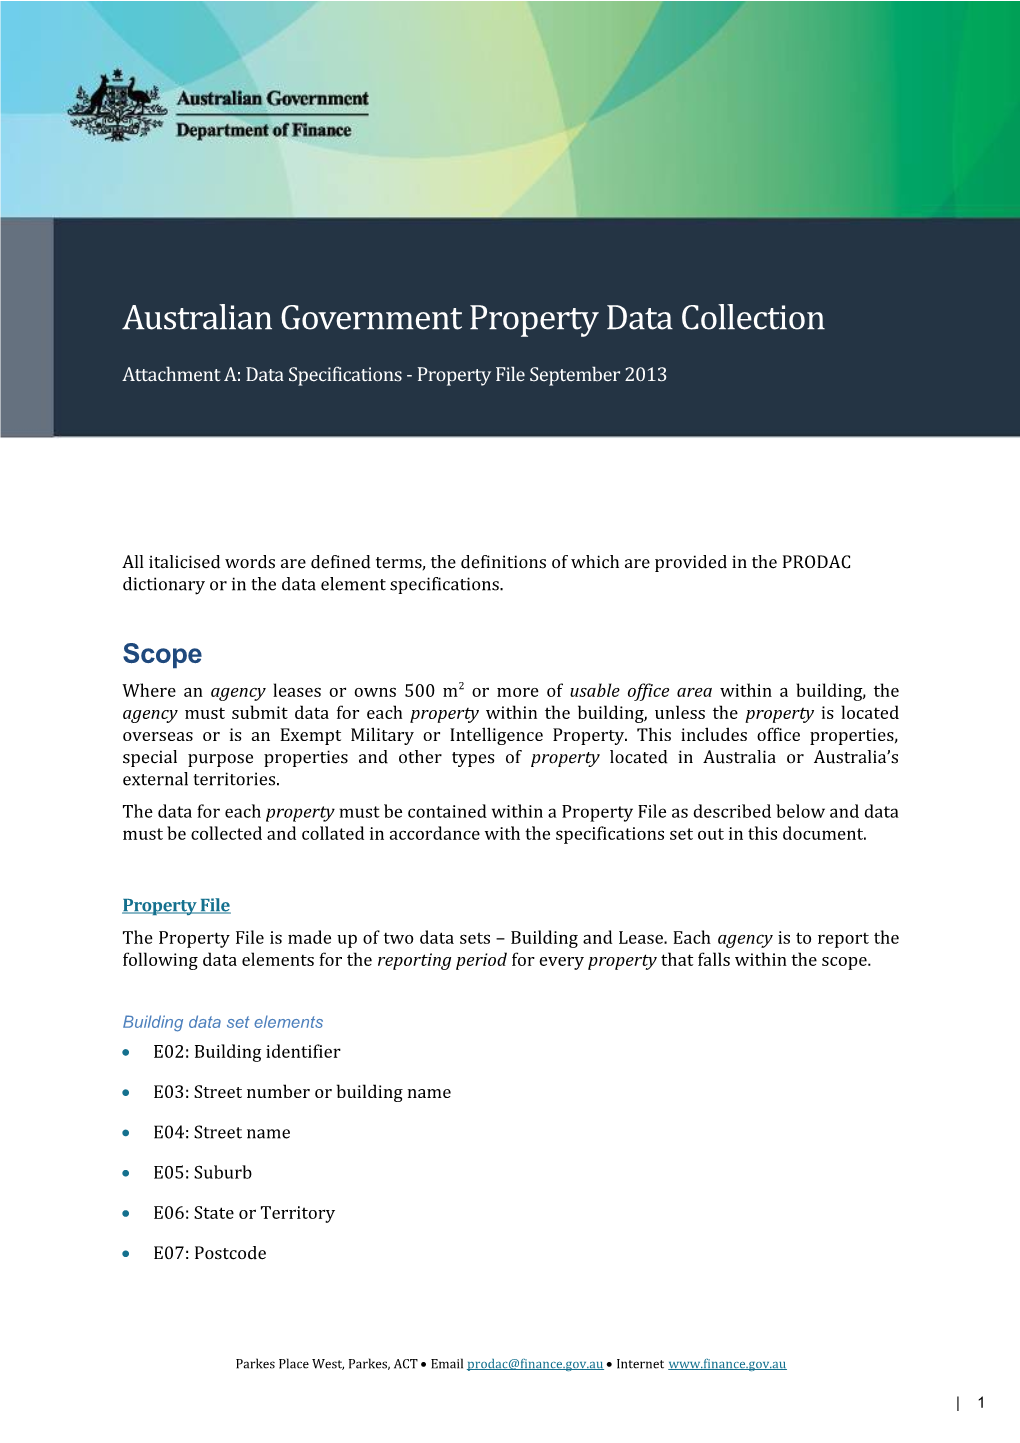 Australian Government Property Data Collection - Attachment A: Data Specifications - Property